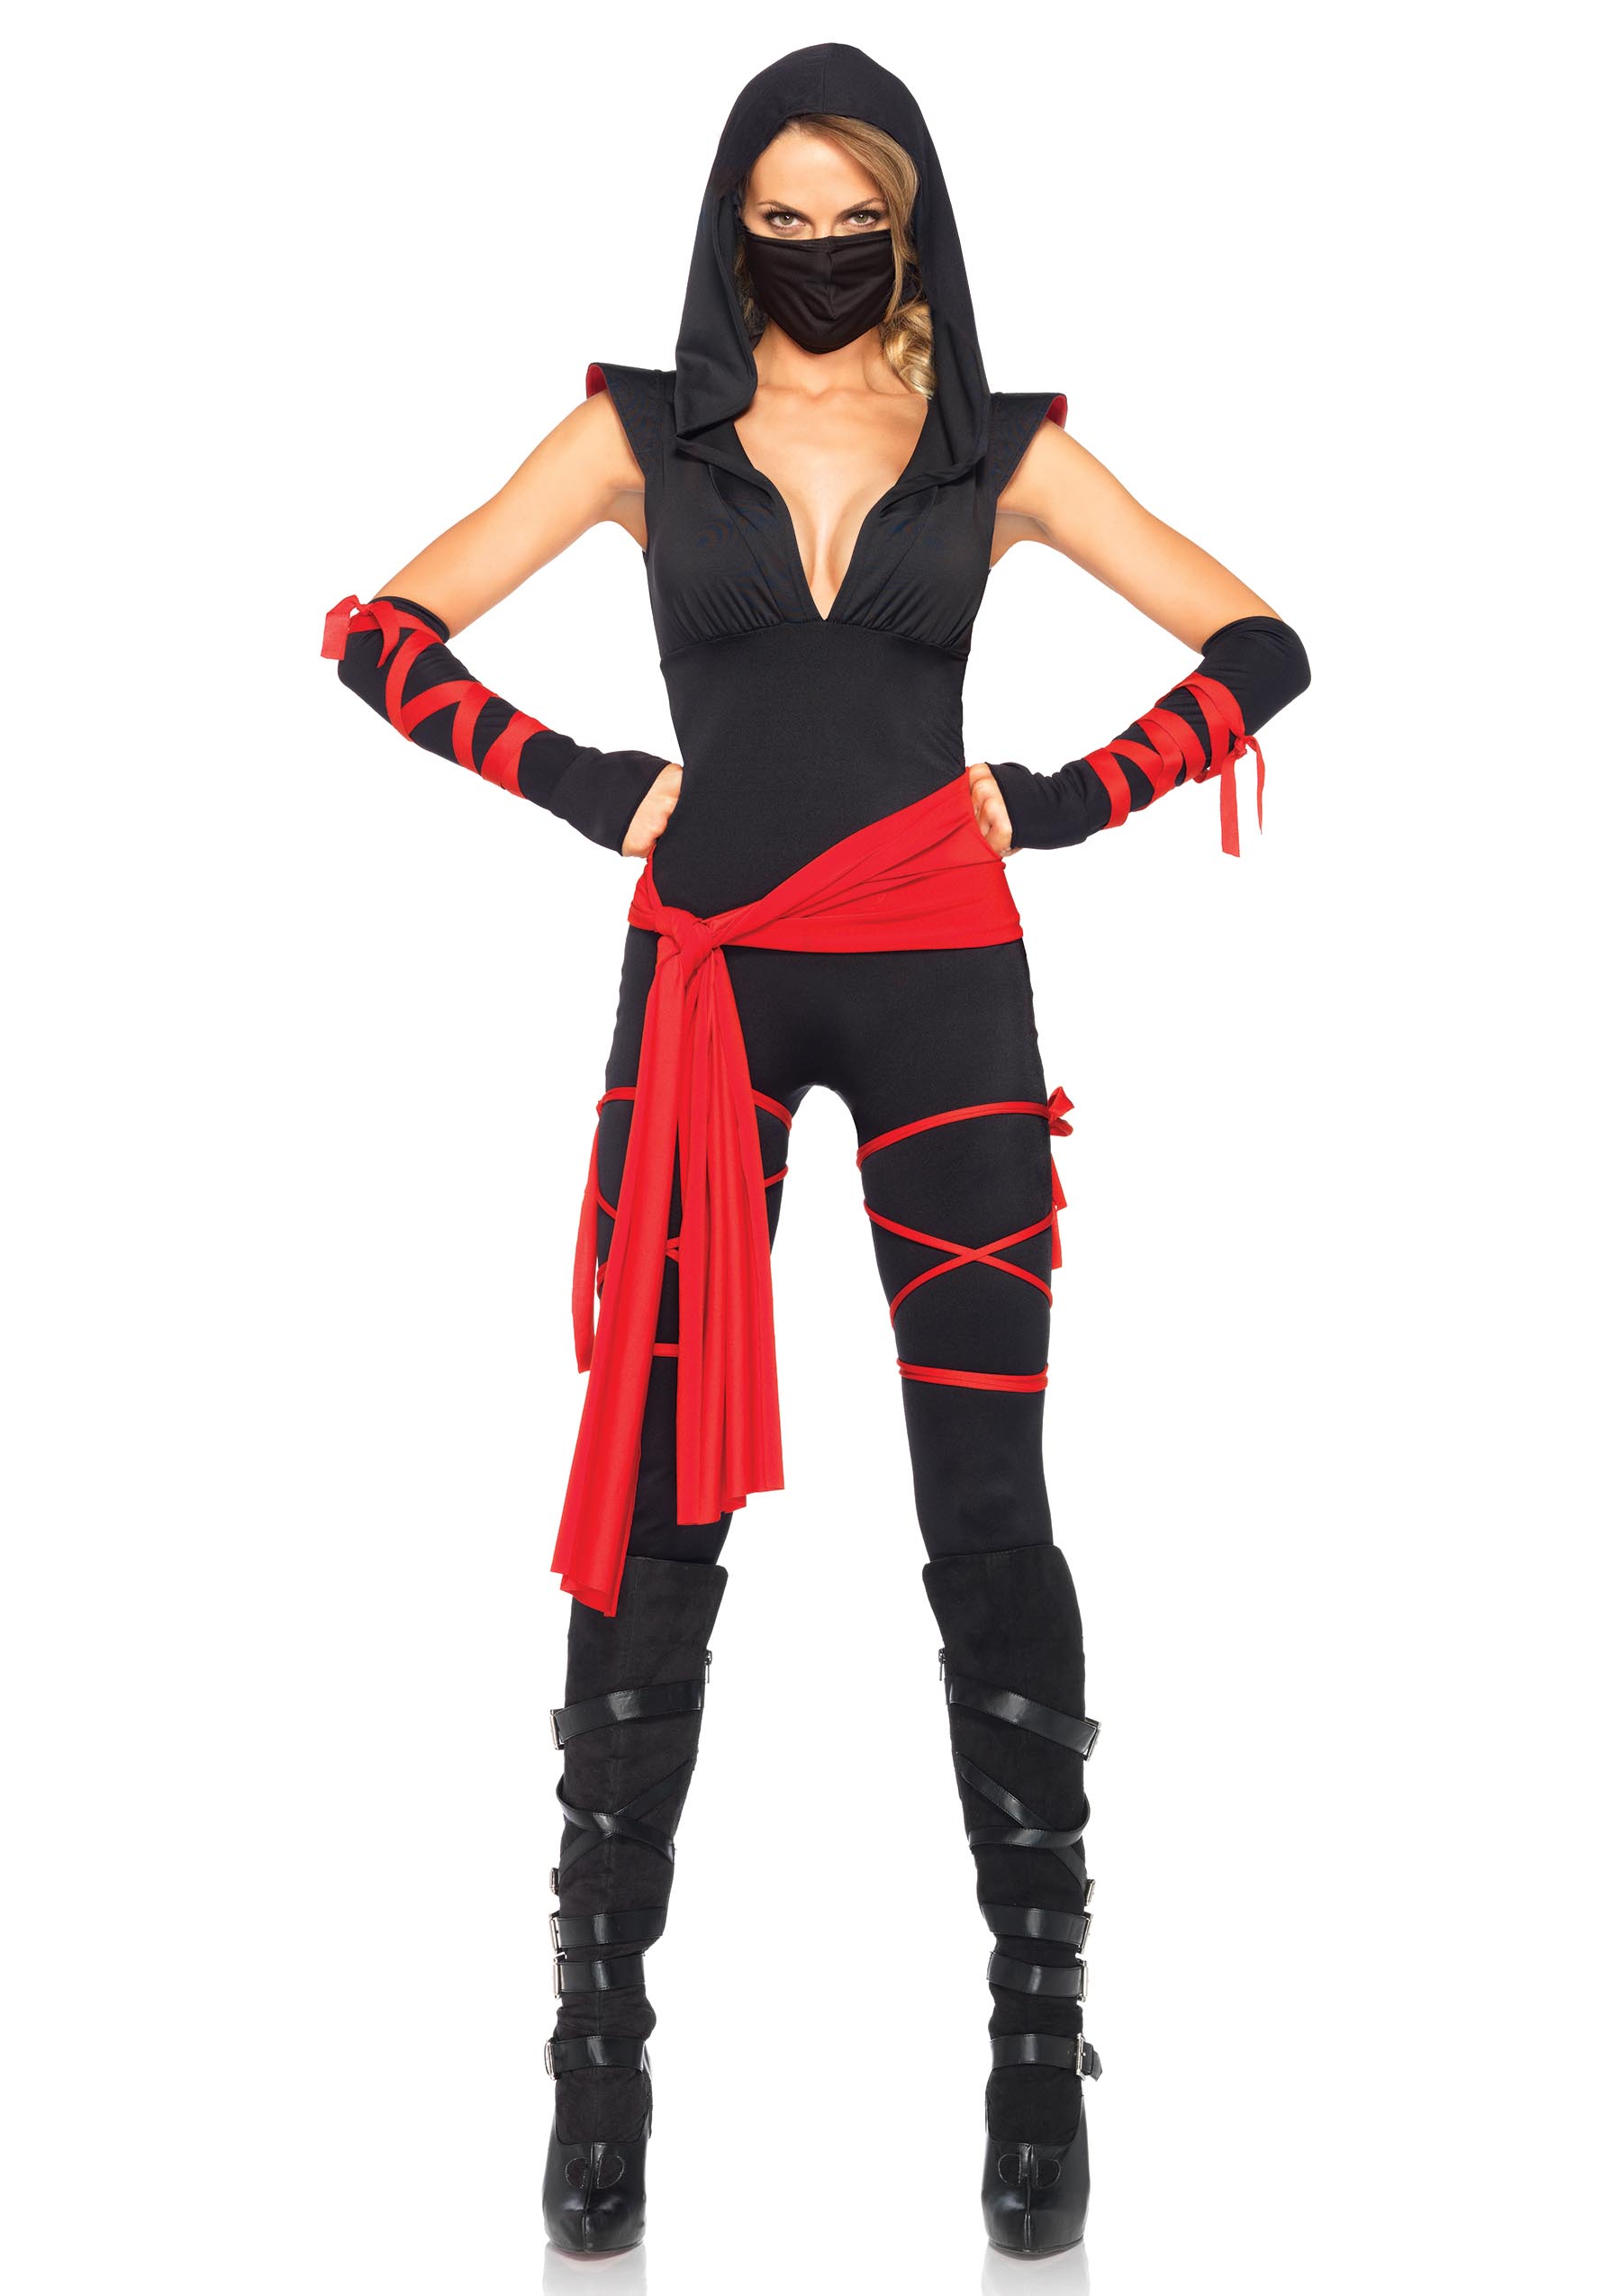 Women's Deadly Ninja Costume Black and Red Large